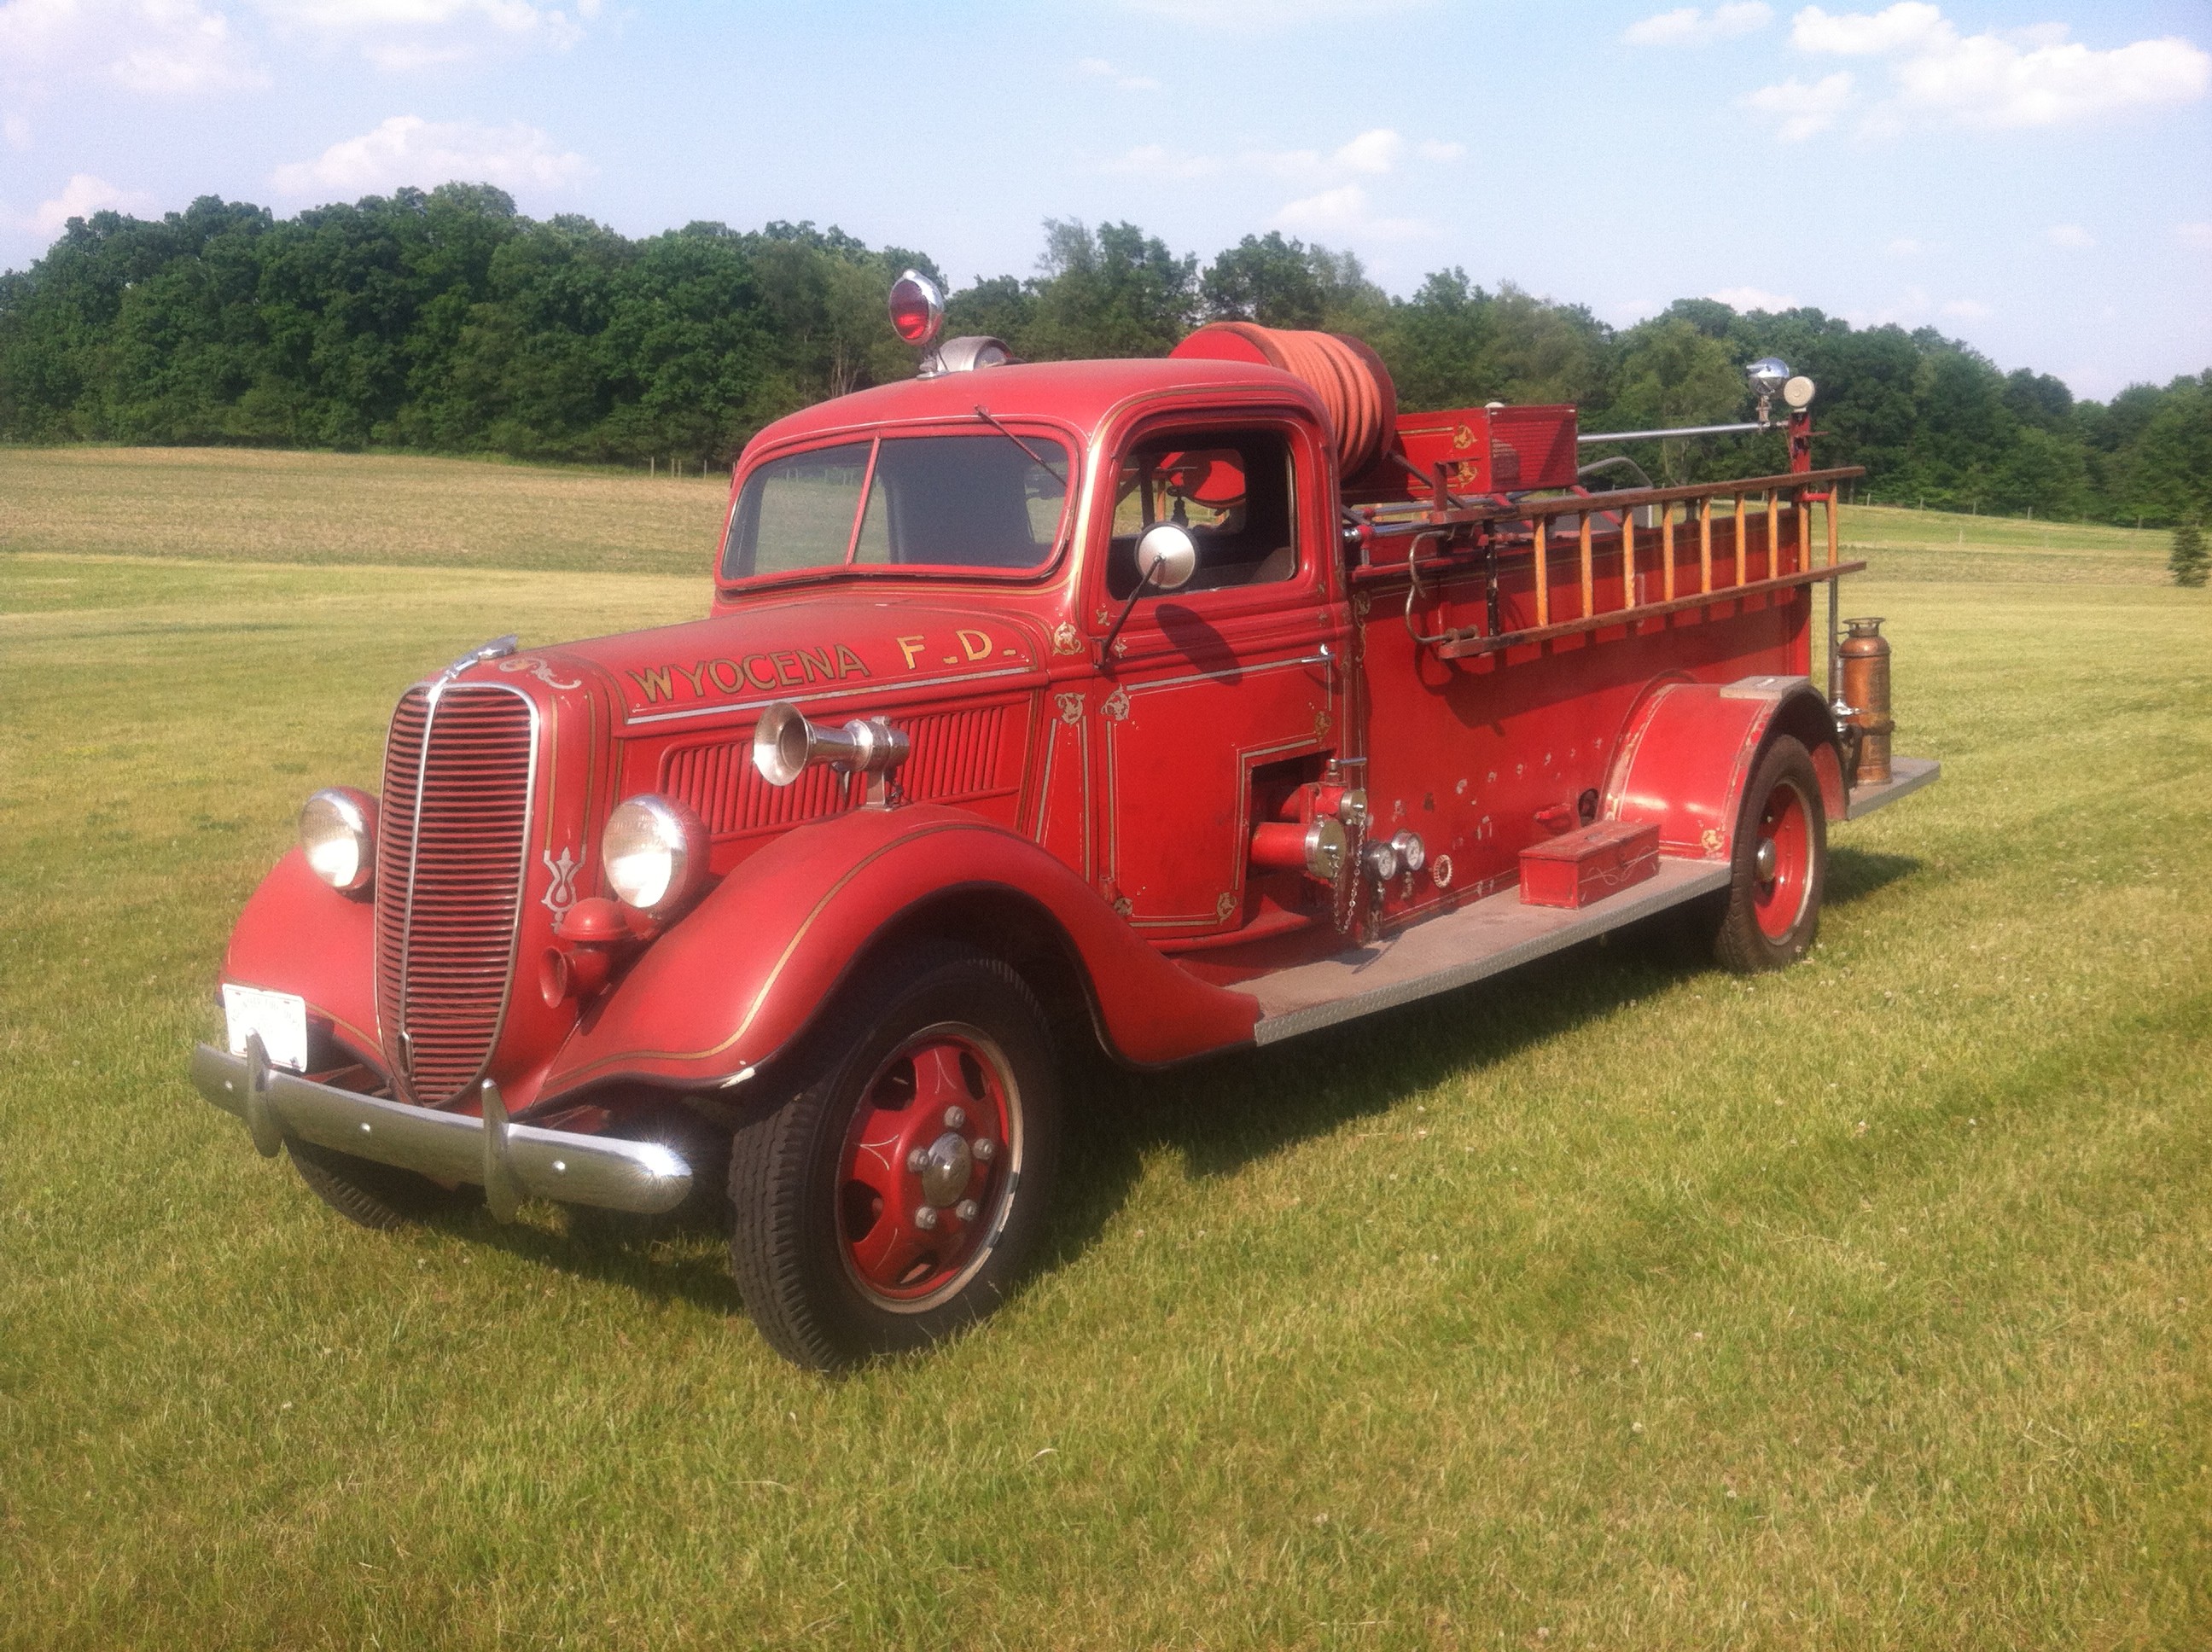 Ford Fire truck